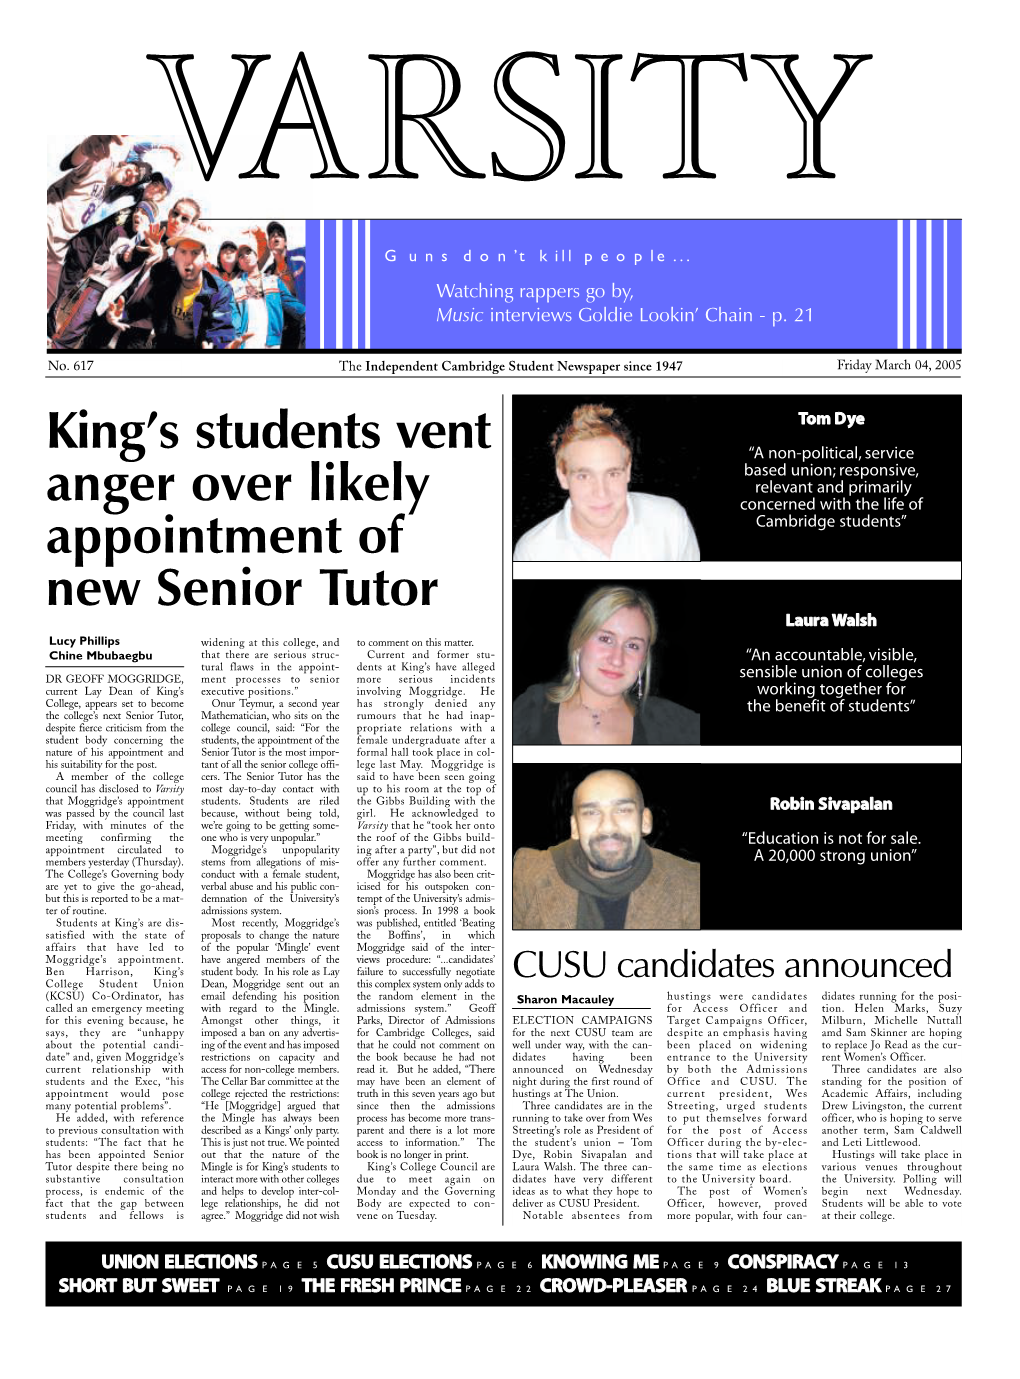 King's Students Vent Anger Over Likely Appointment of New Senior Tutor